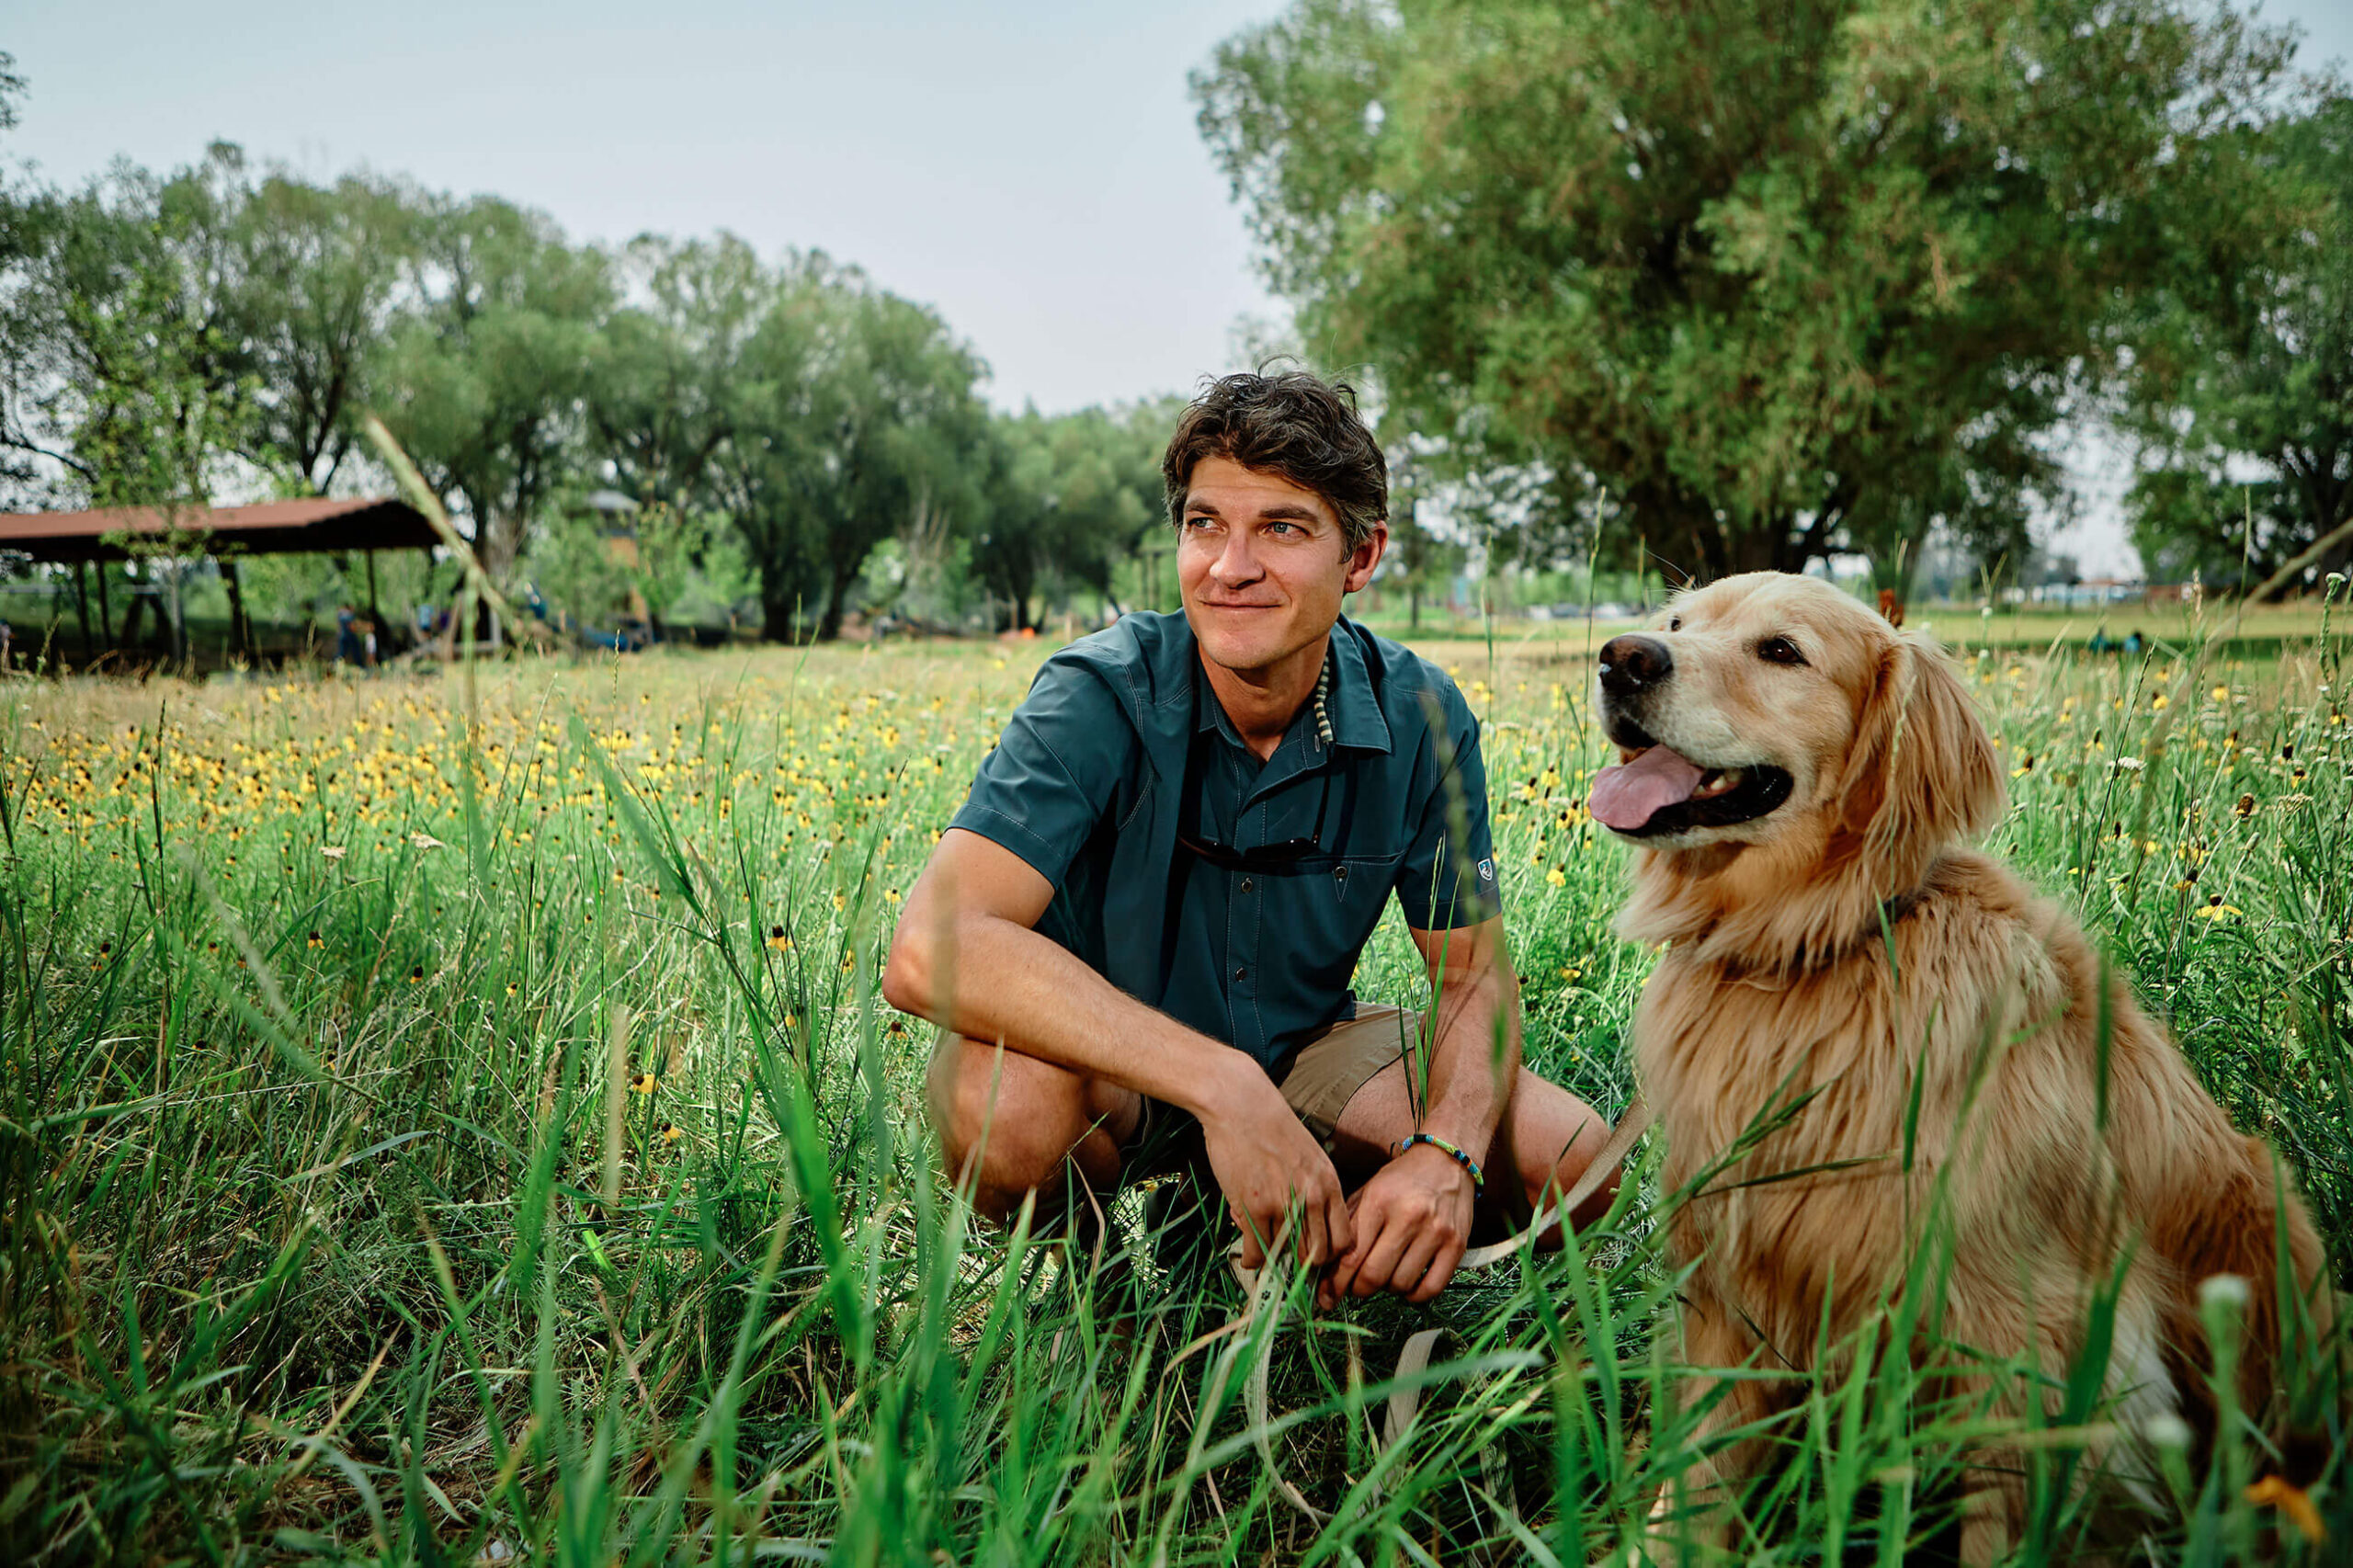 A young man crouching next to a golden retriever in a field.